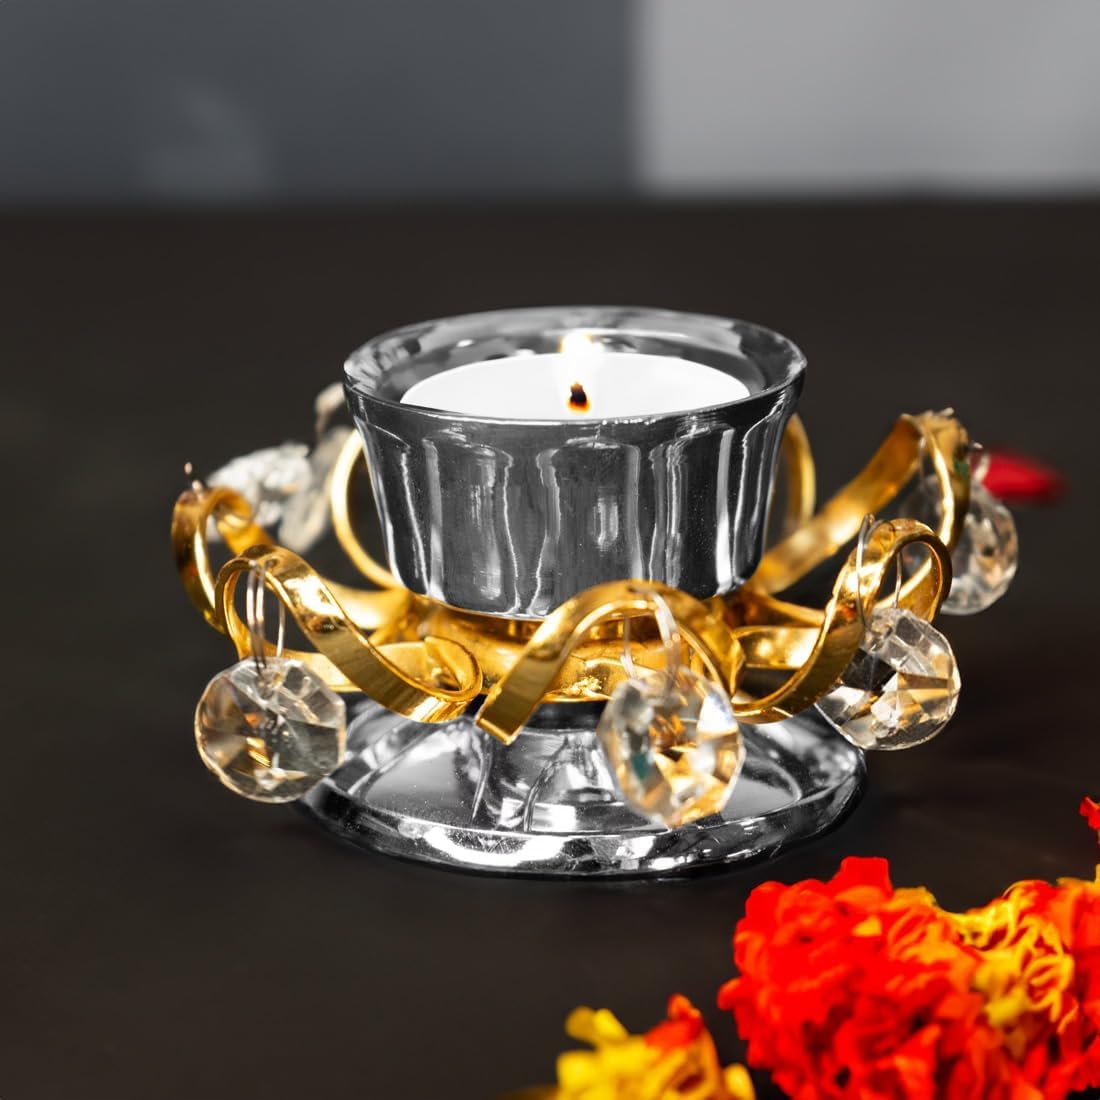 100% Pure Brass Crystal Tealight Candle Holder for Home Decor | Perfect Candle Stand for Diwali Decoration and Pooja Room | Indoor & Outdoor, Festival Decorative Candles Gift Items